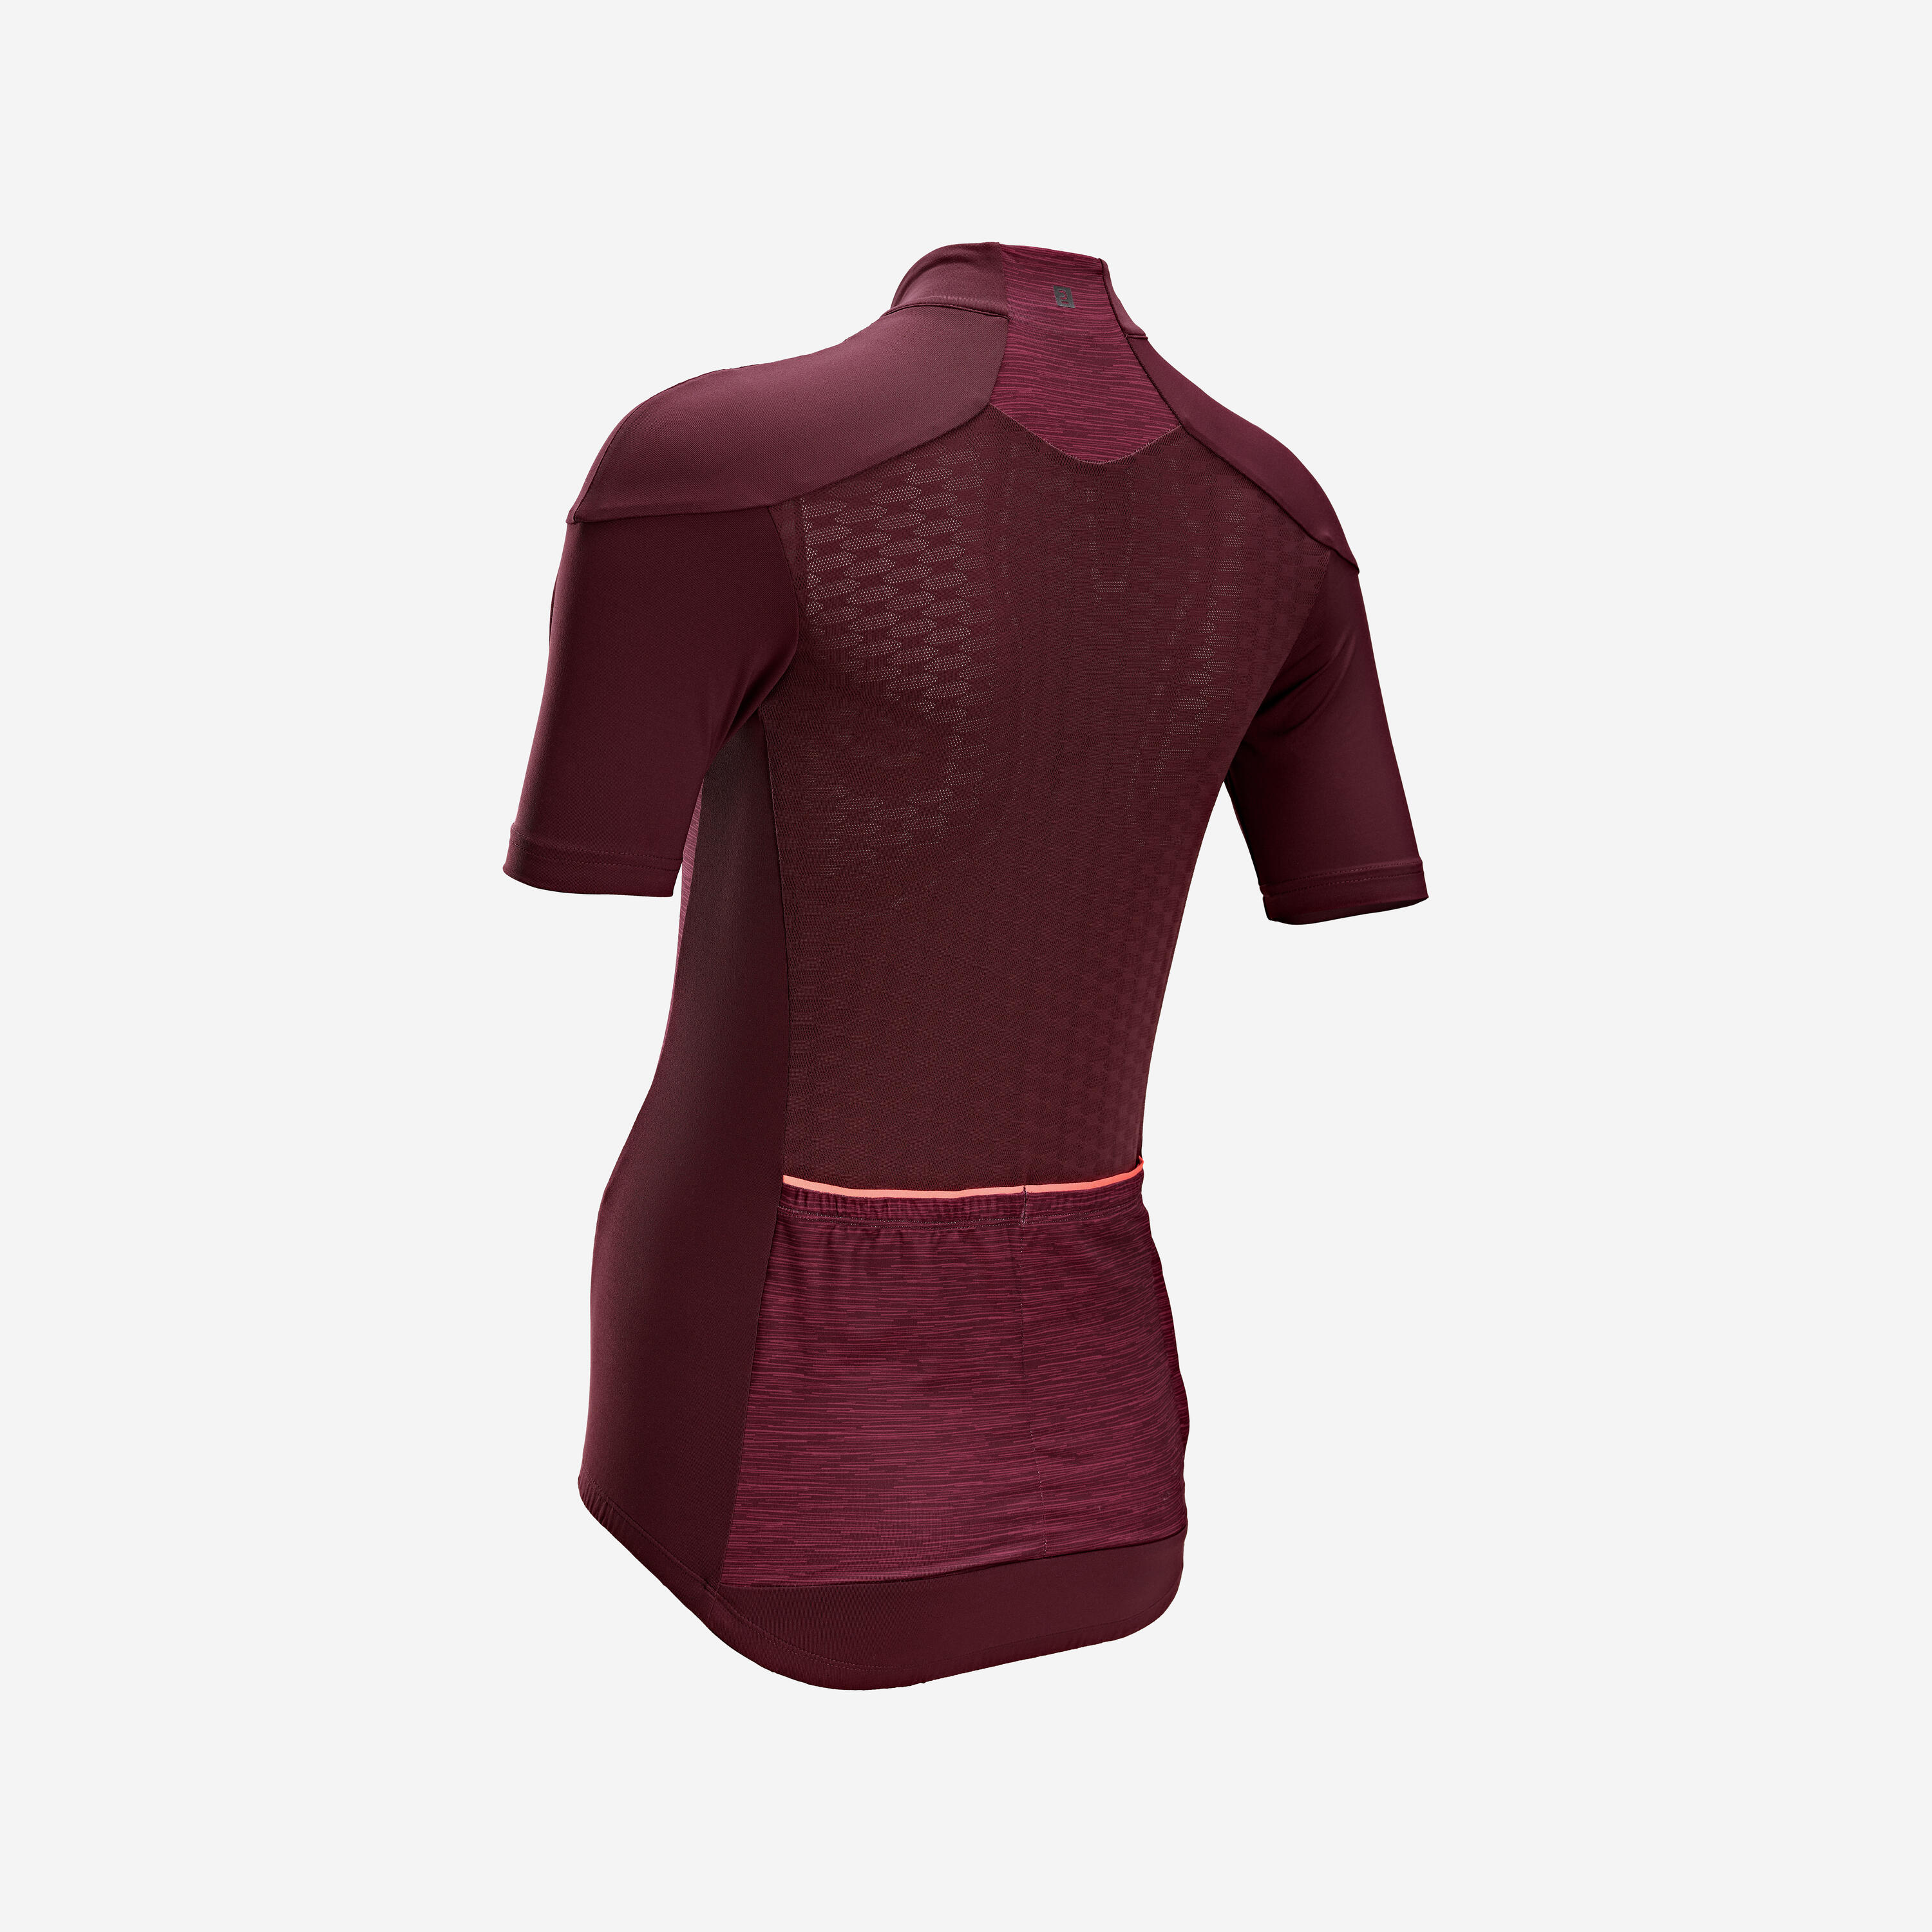 Women's Short-Sleeved Road Cycling Jersey 500 - Burgundy 3/7